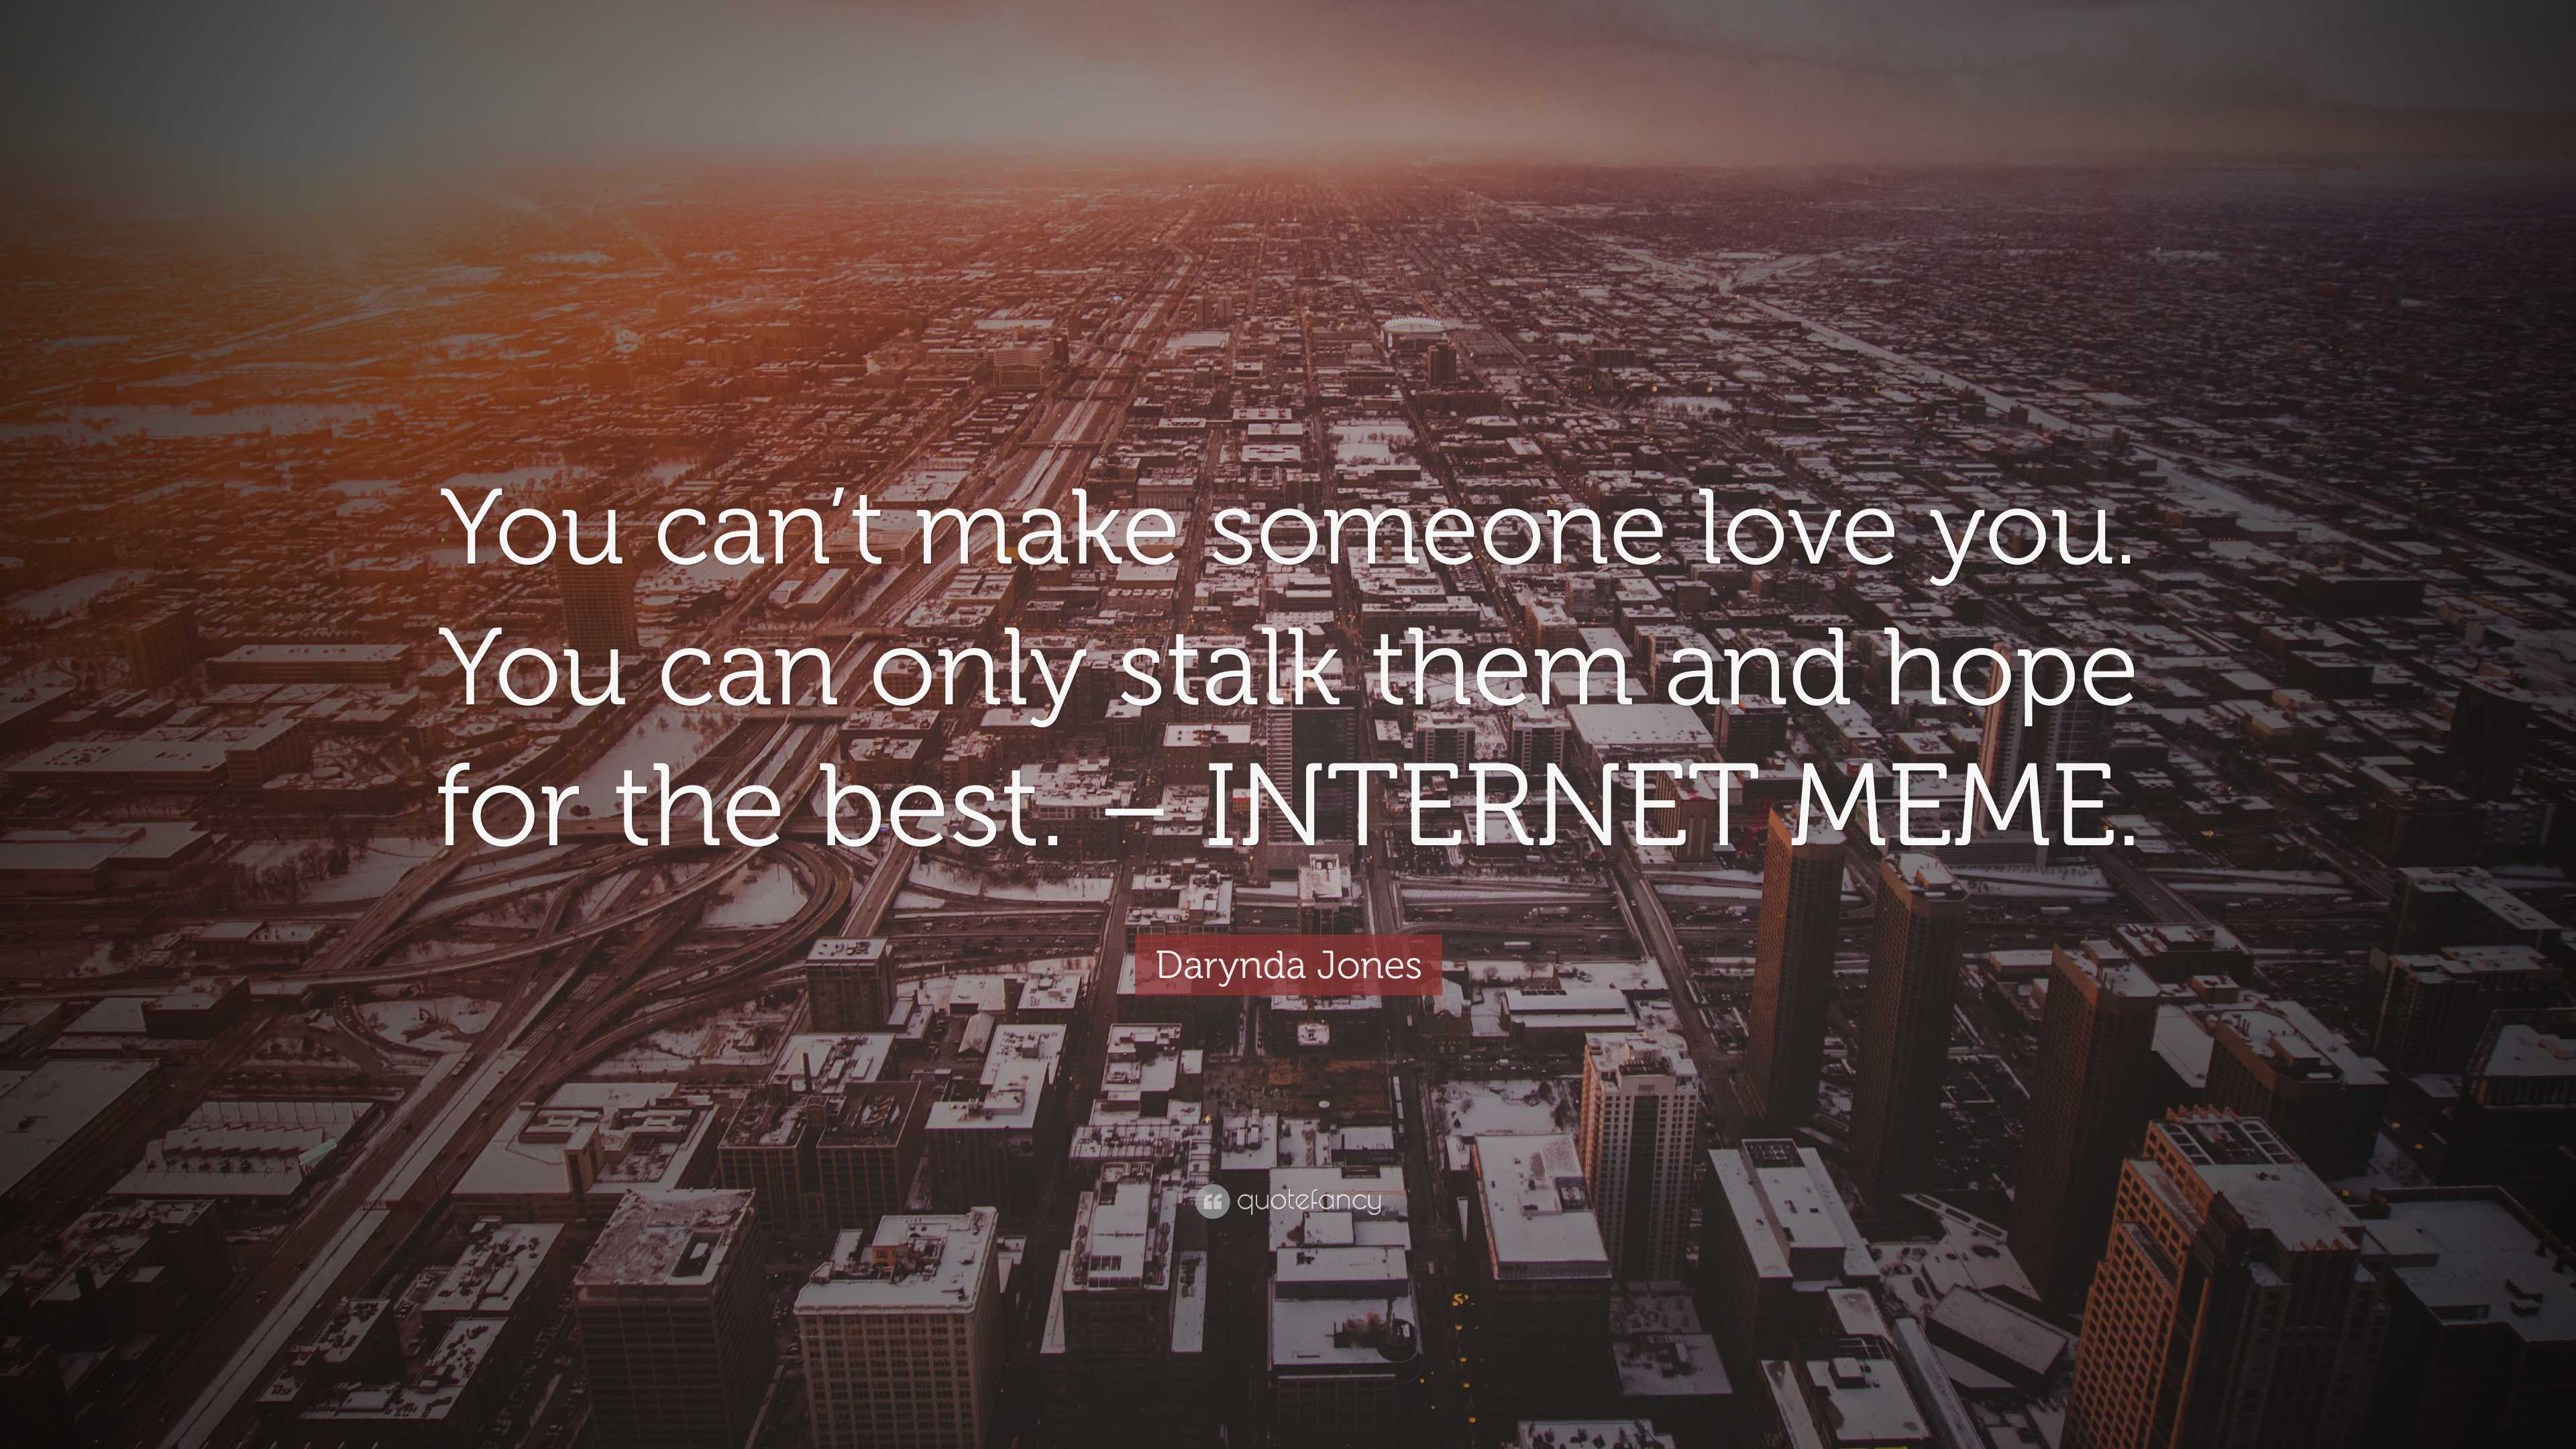 Darynda Jones Quote: “You can't make someone love you. You can only stalk  them and